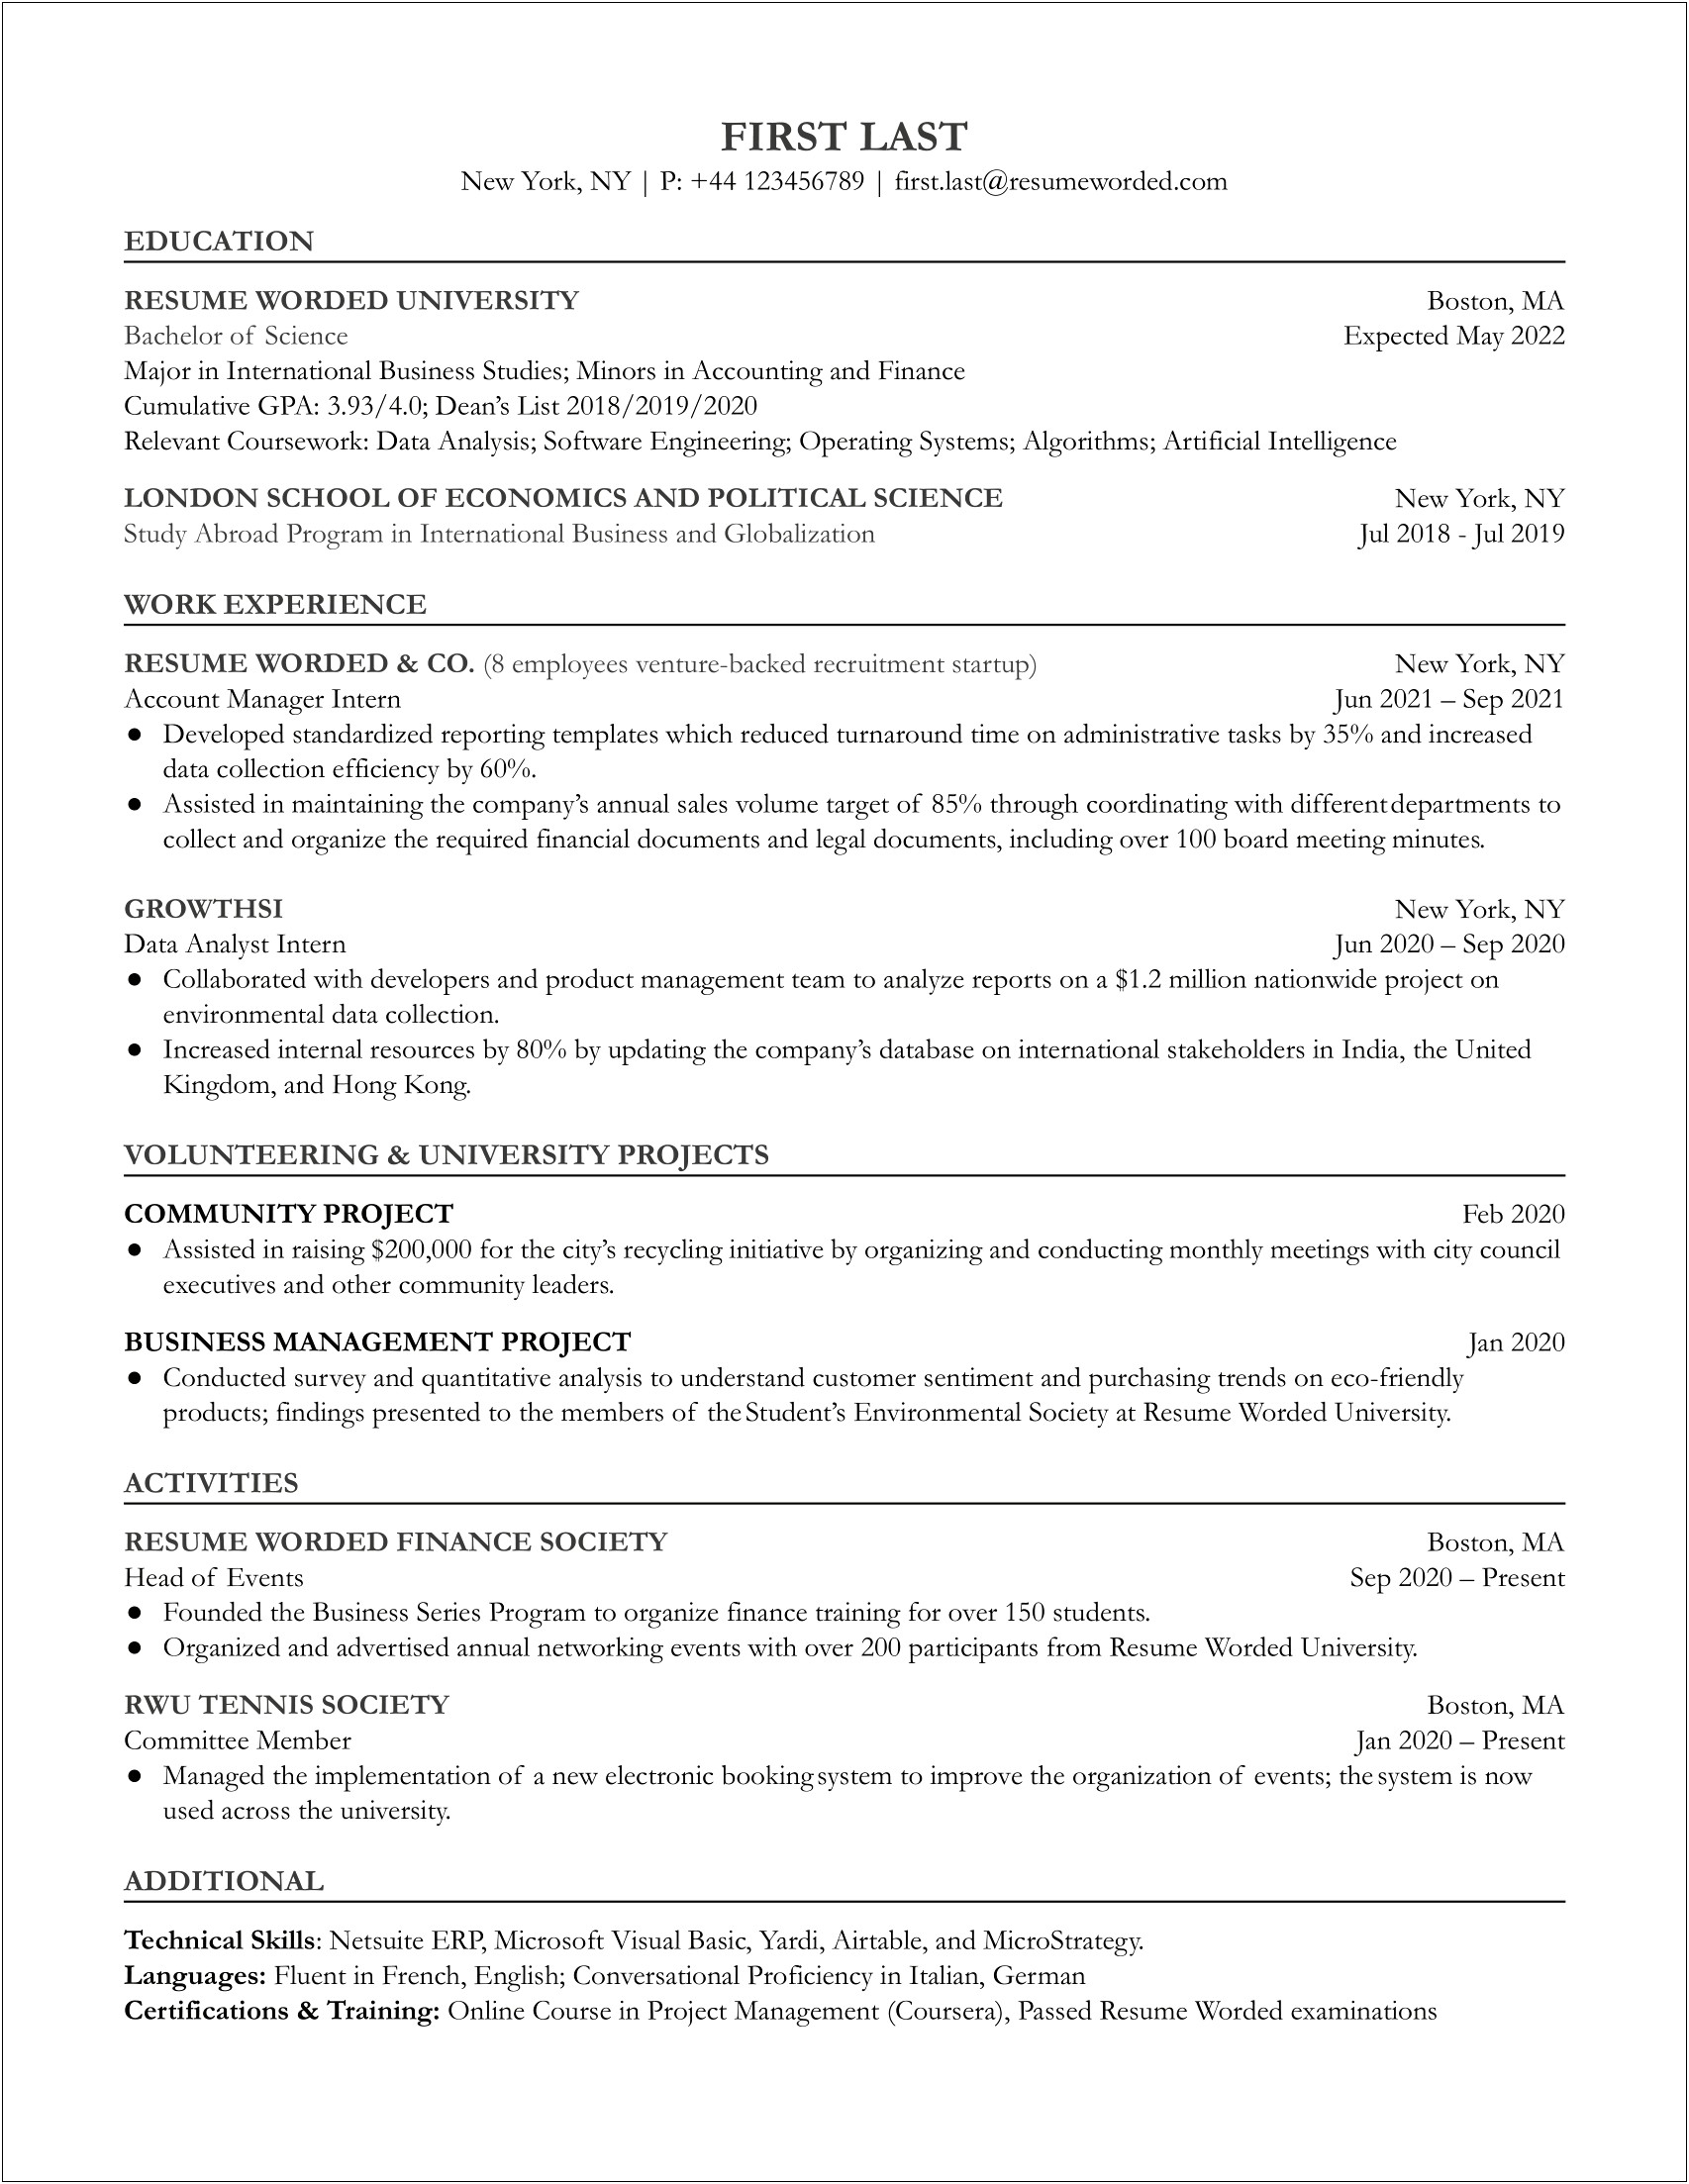 Entry Level Account Manager Resume